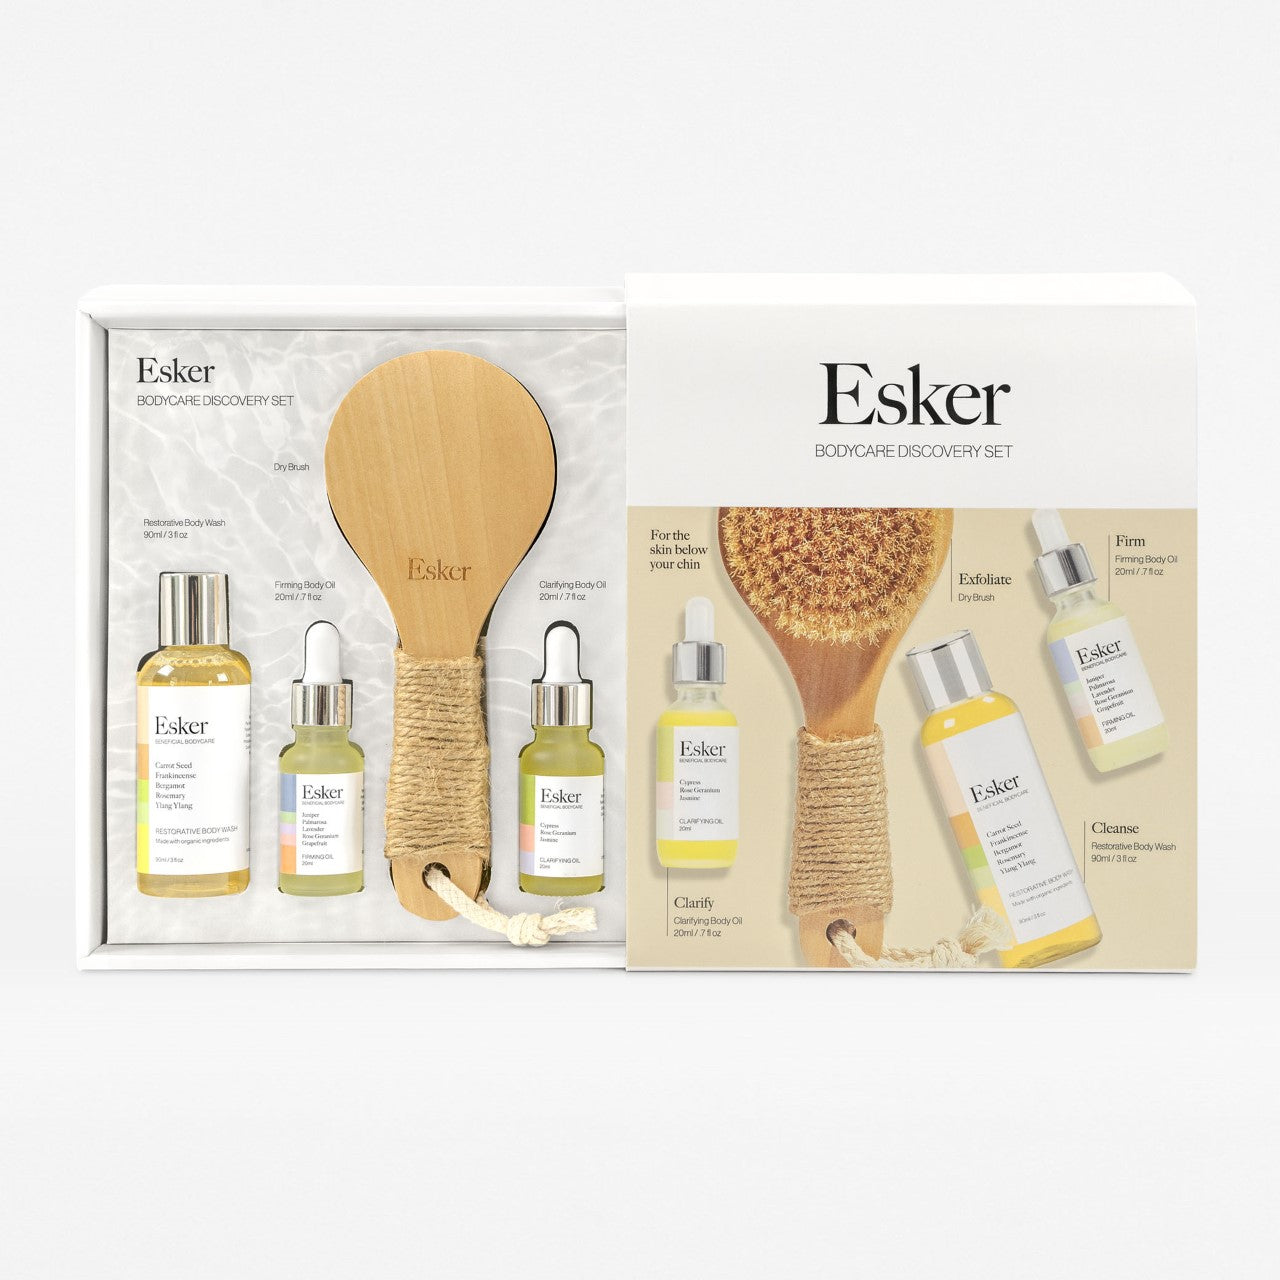 Esker Bodycare Discovery Set with dry brush and body oils